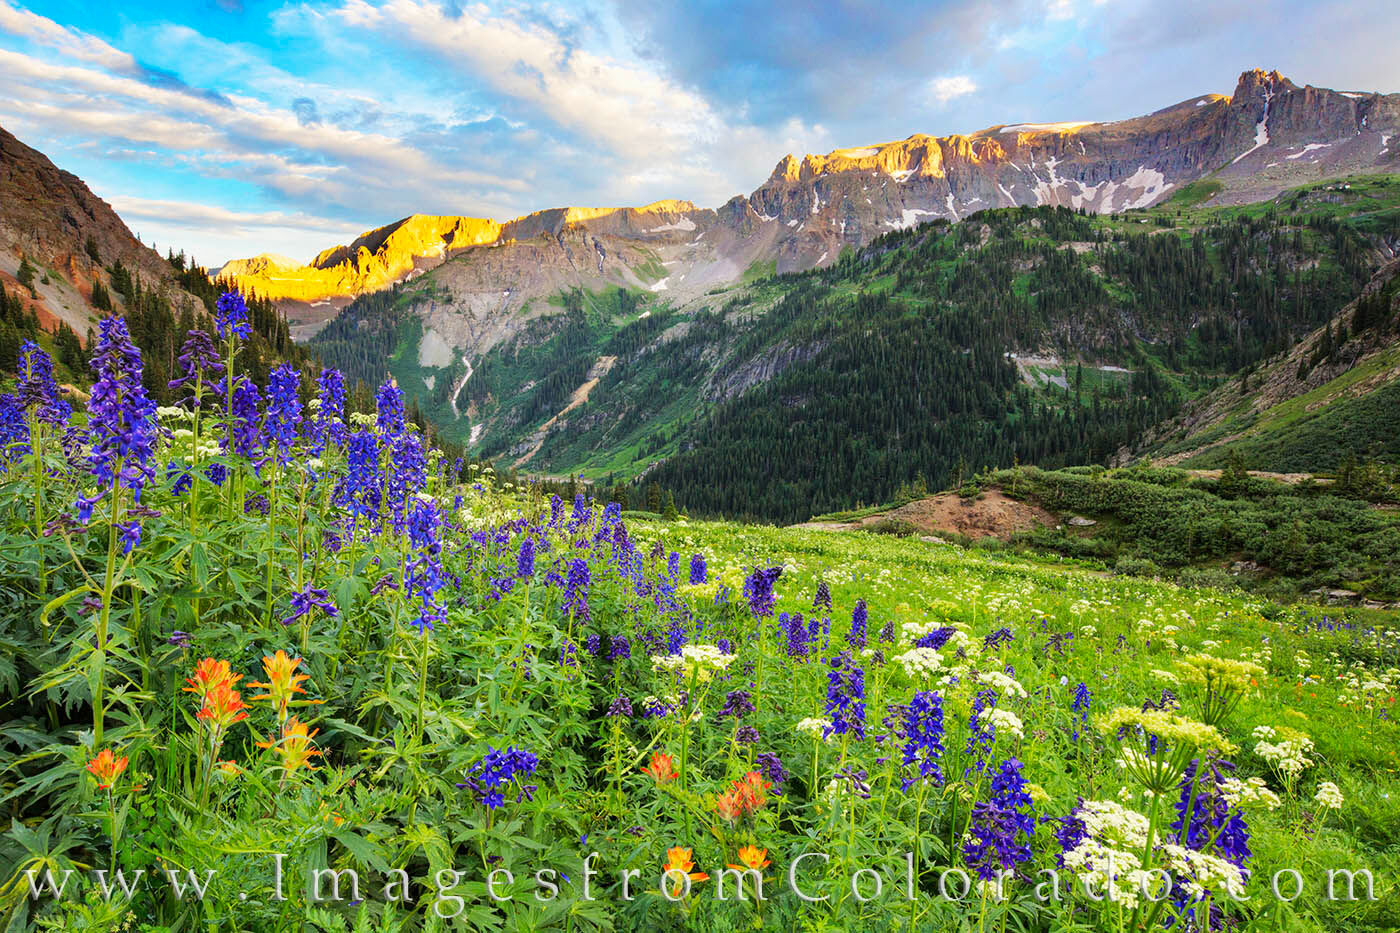 Blue lupines, red paintbrush, and other wildflowers fill the slopes and meadows of Yankee Boy Basin. The road from Ouray to this...